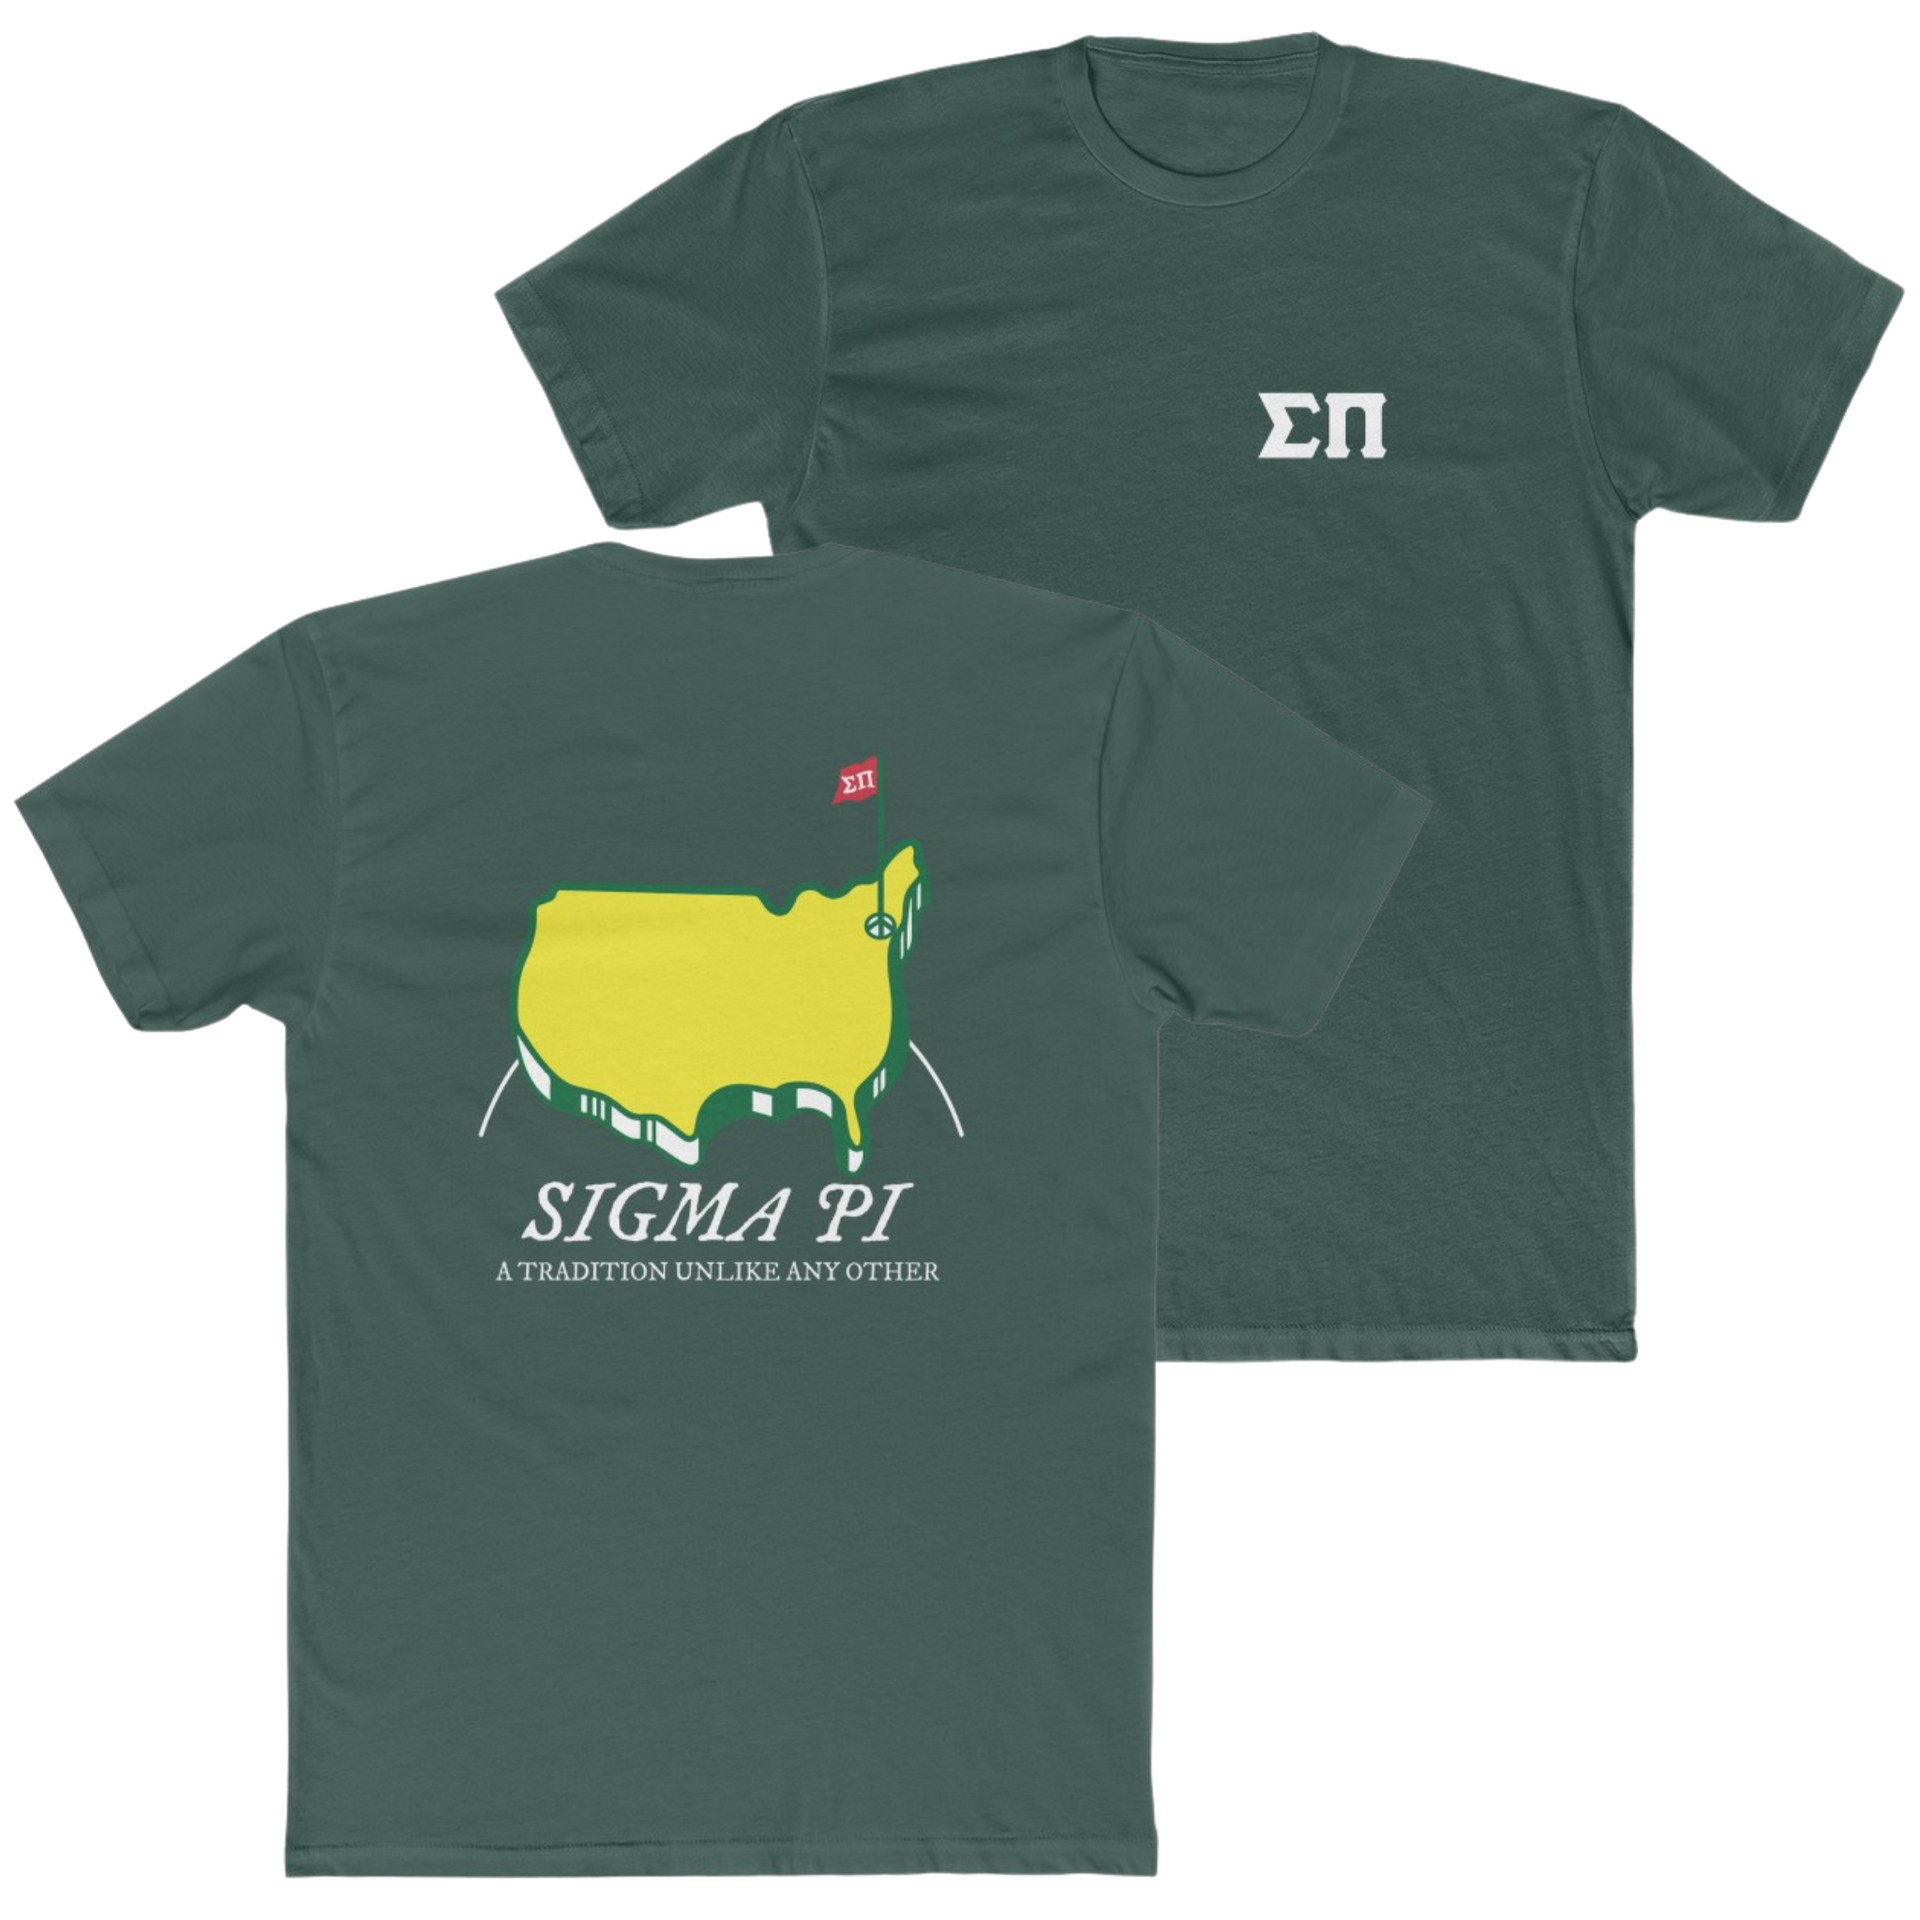 Green Sigma Pi Graphic T-Shirt | The Masters | Sigma Pi Apparel and Merchandise